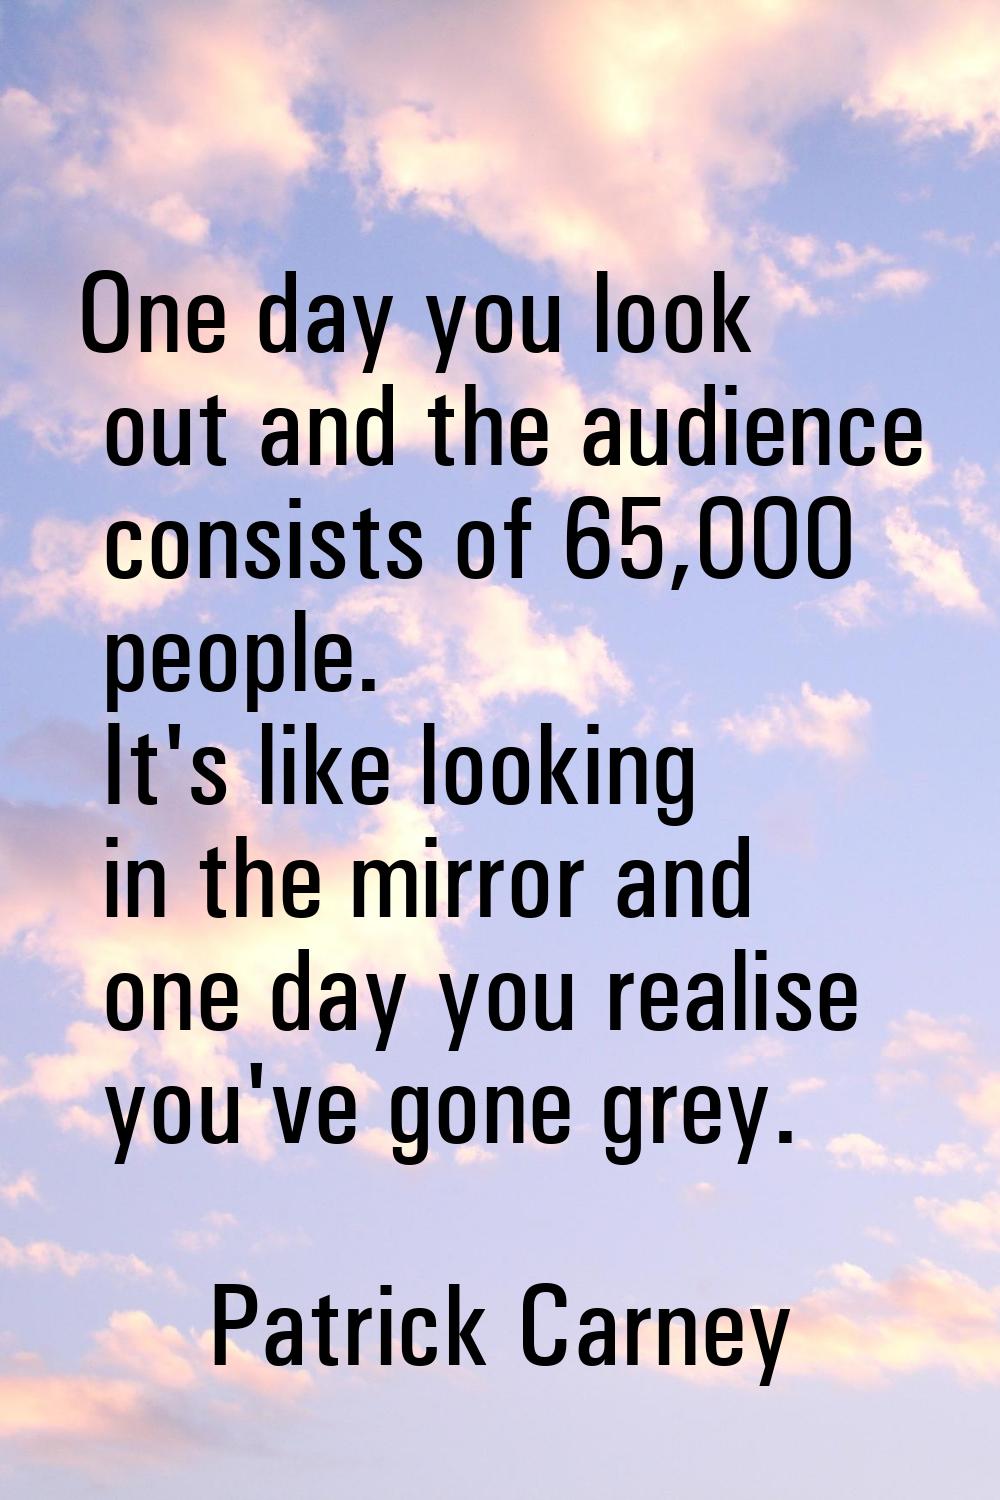 One day you look out and the audience consists of 65,000 people. It's like looking in the mirror an